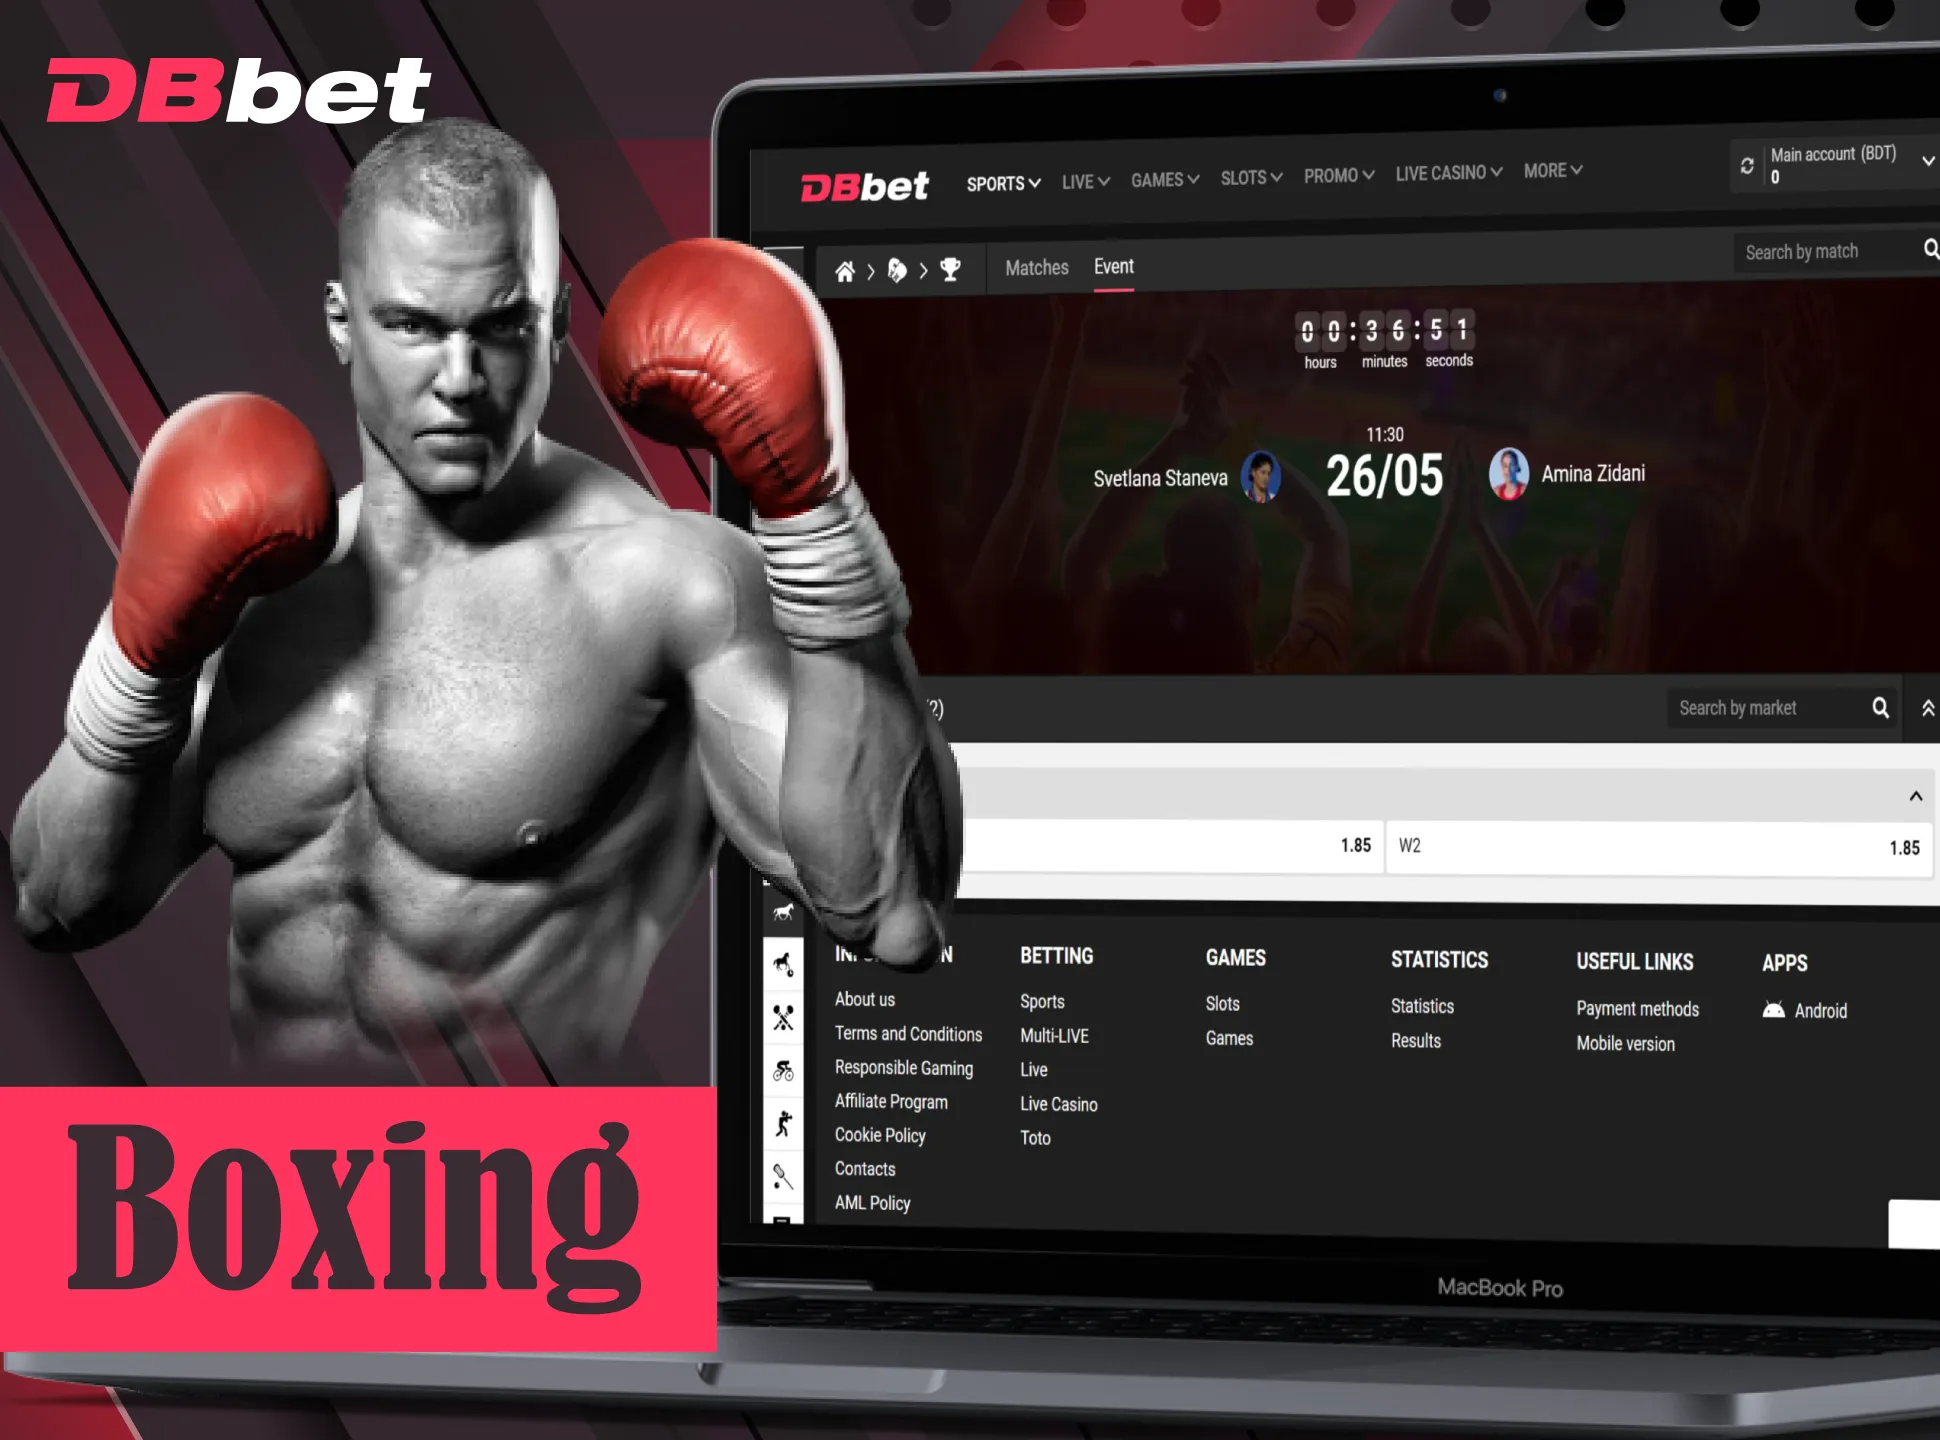 Bet on your favourite box fighter at DBbet.